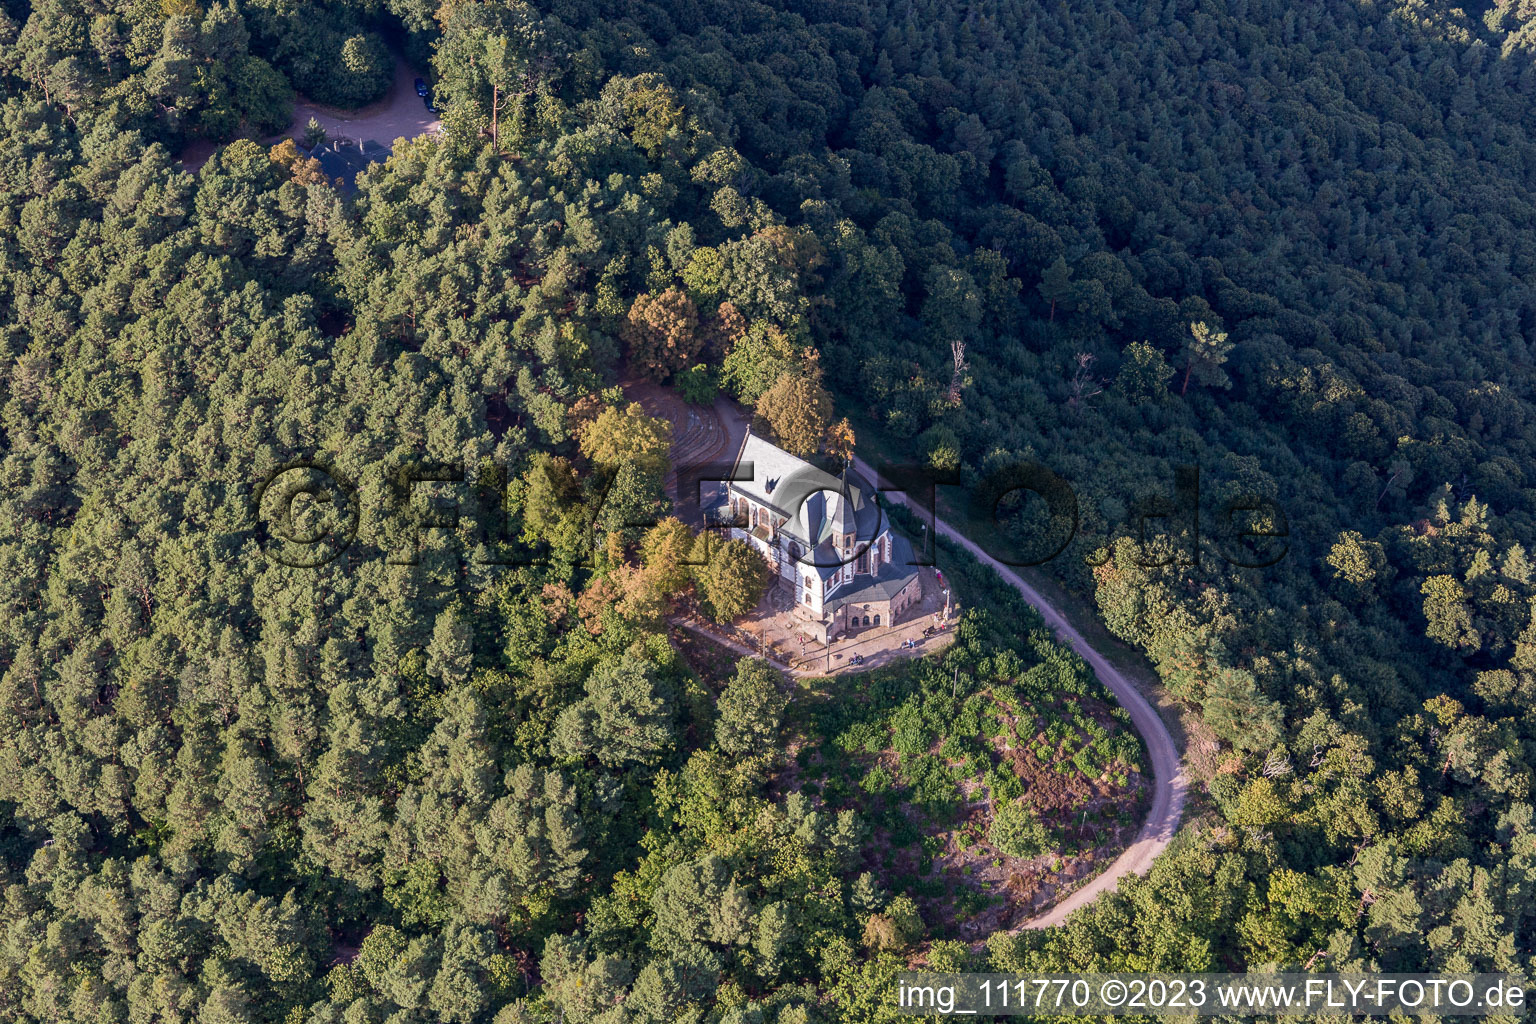 St. Anna Chapel in Burrweiler in the state Rhineland-Palatinate, Germany seen from above